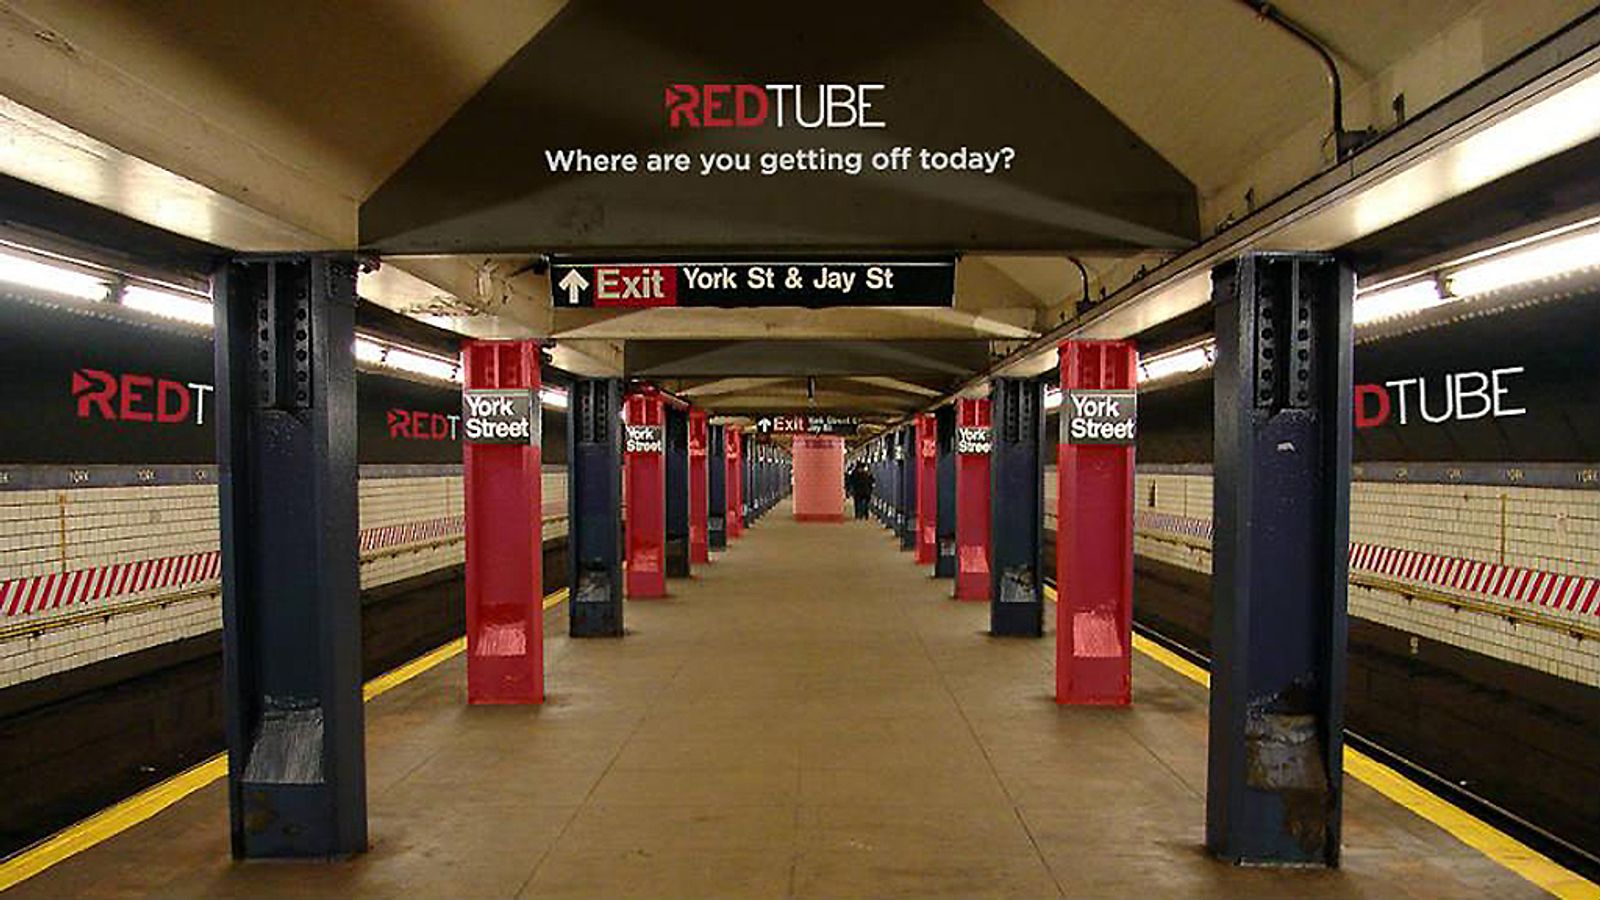 RedTube Asks NY Governor If It Can Sponsor a Subway Station